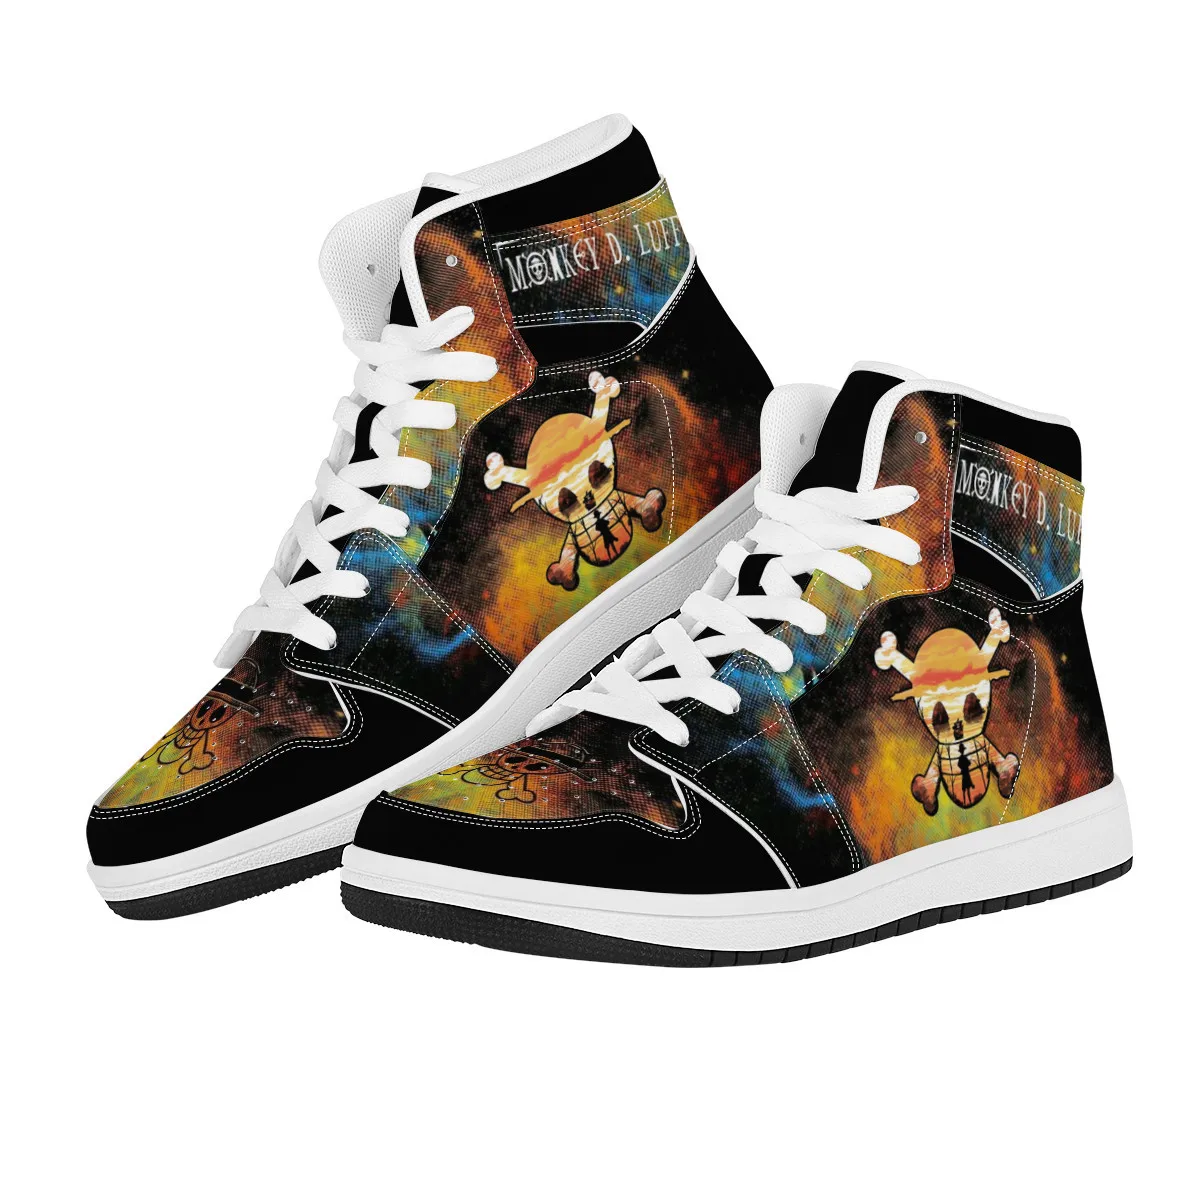 2023 Anime One Piece Luffy Canvas Sneakers Casual Shoes Basketball Shoes Cartoon Printing Comfortable Flat Shoes 13 - One Piece Shoes